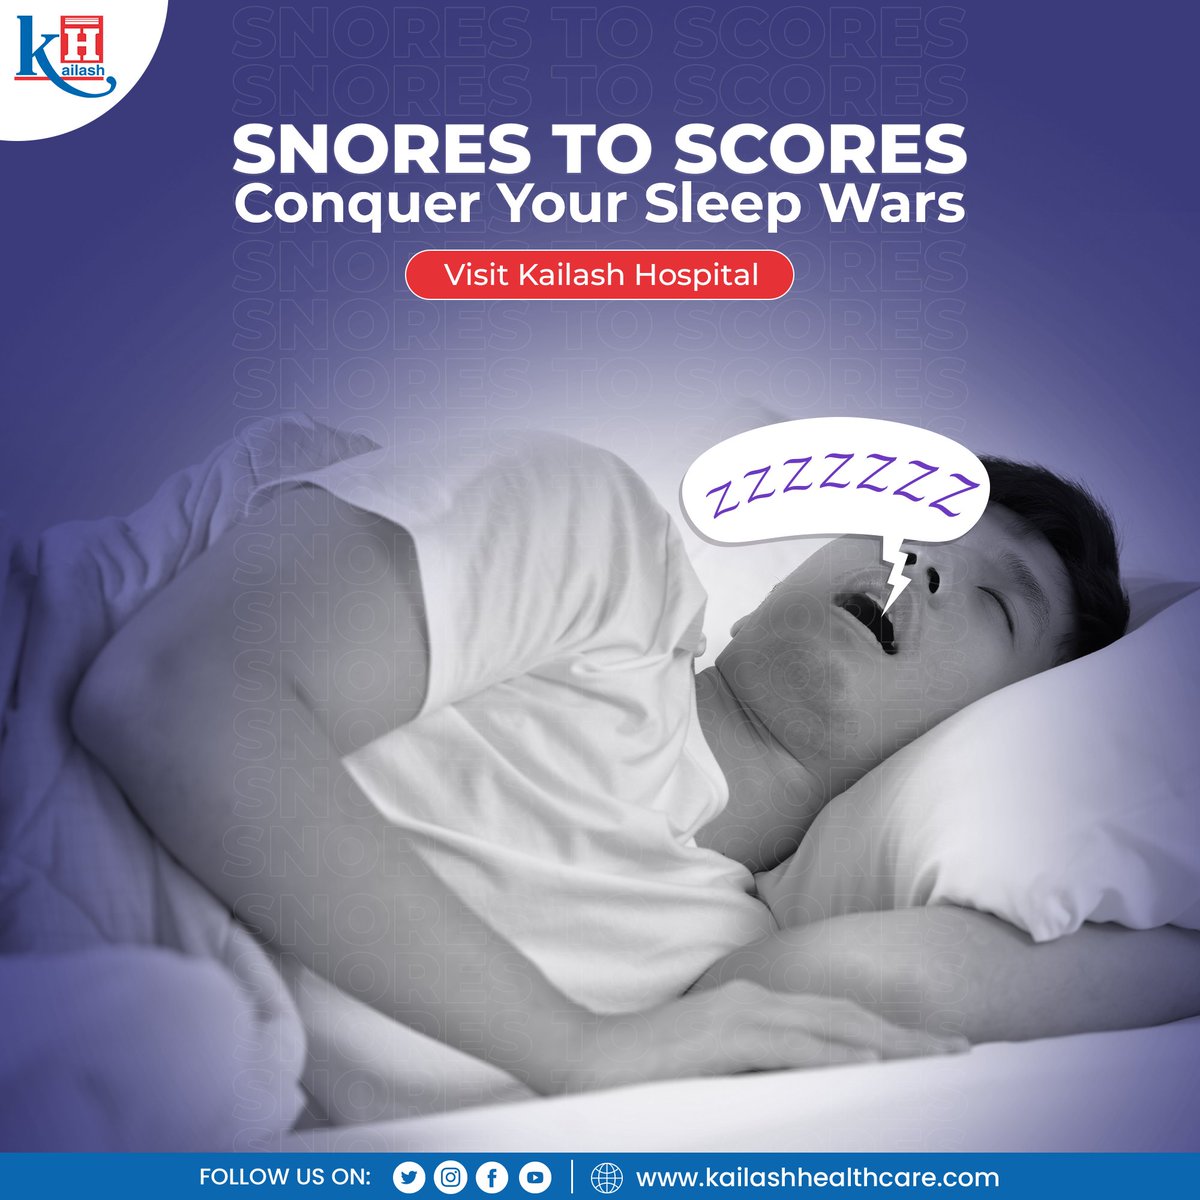 Snoring isn't just disturbing for people around you but it also indicates disturbed sleep patterns!

Your Snores aren't normal! 

Consult our Doctors today: kailashhealthcare.com

#sleepmedicine #obstructivesleepapnea #snoring #ENTTreatment #ENTSpecialist #KailashHospital